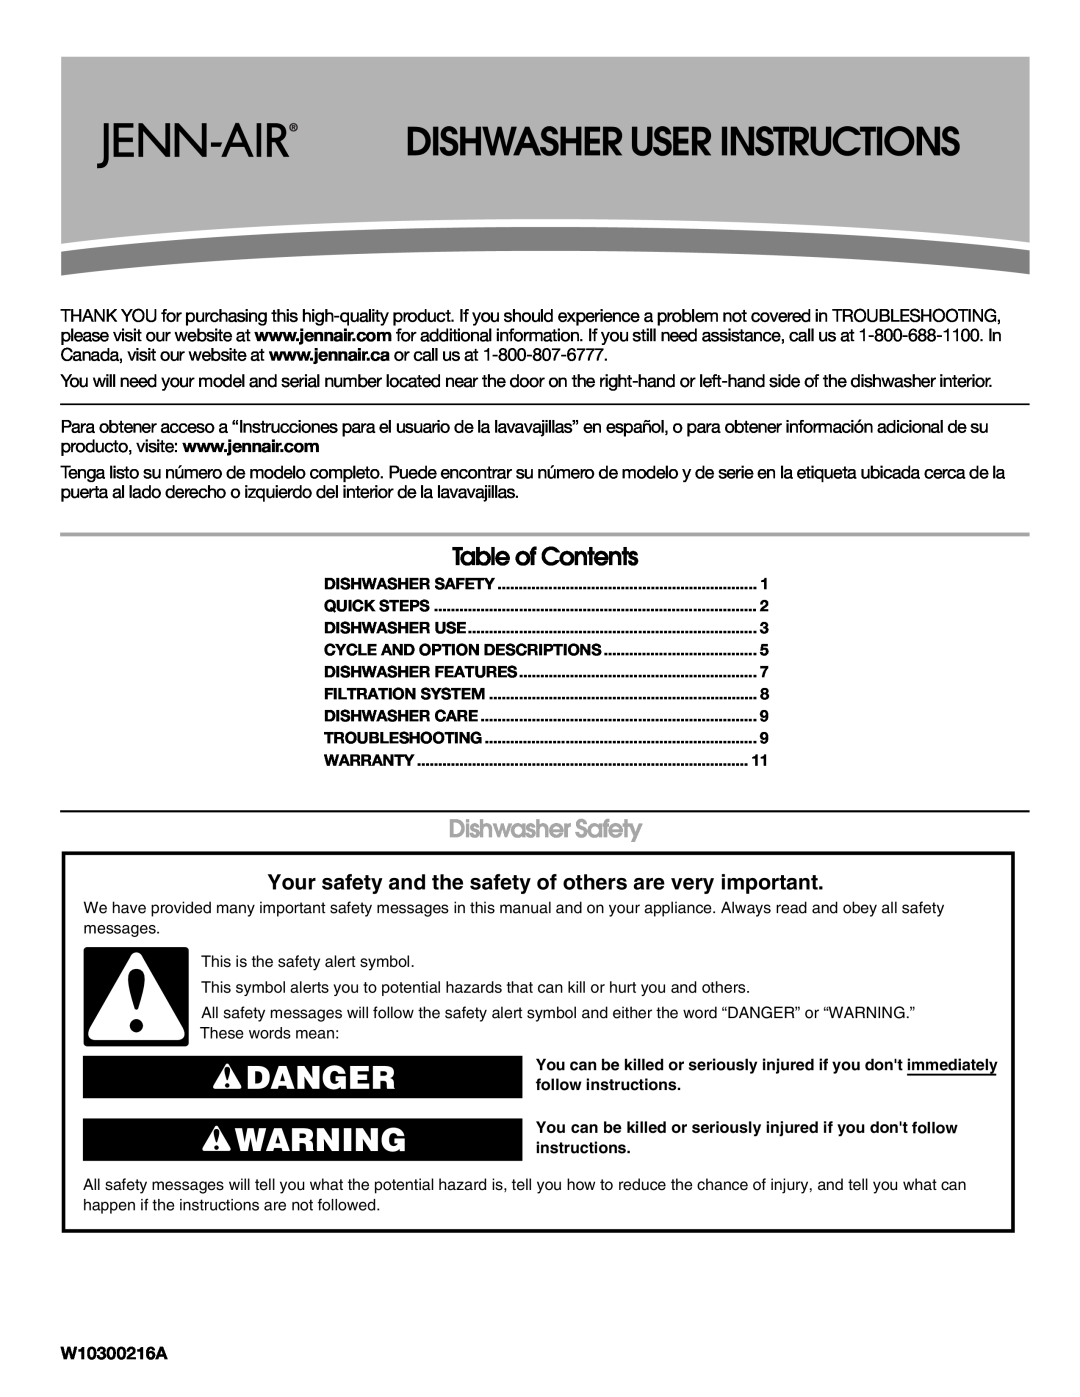 Jenn-Air W10300216A warranty Danger, Table of Contents, Dishwasher Safety, Dishwasher User Instructions 